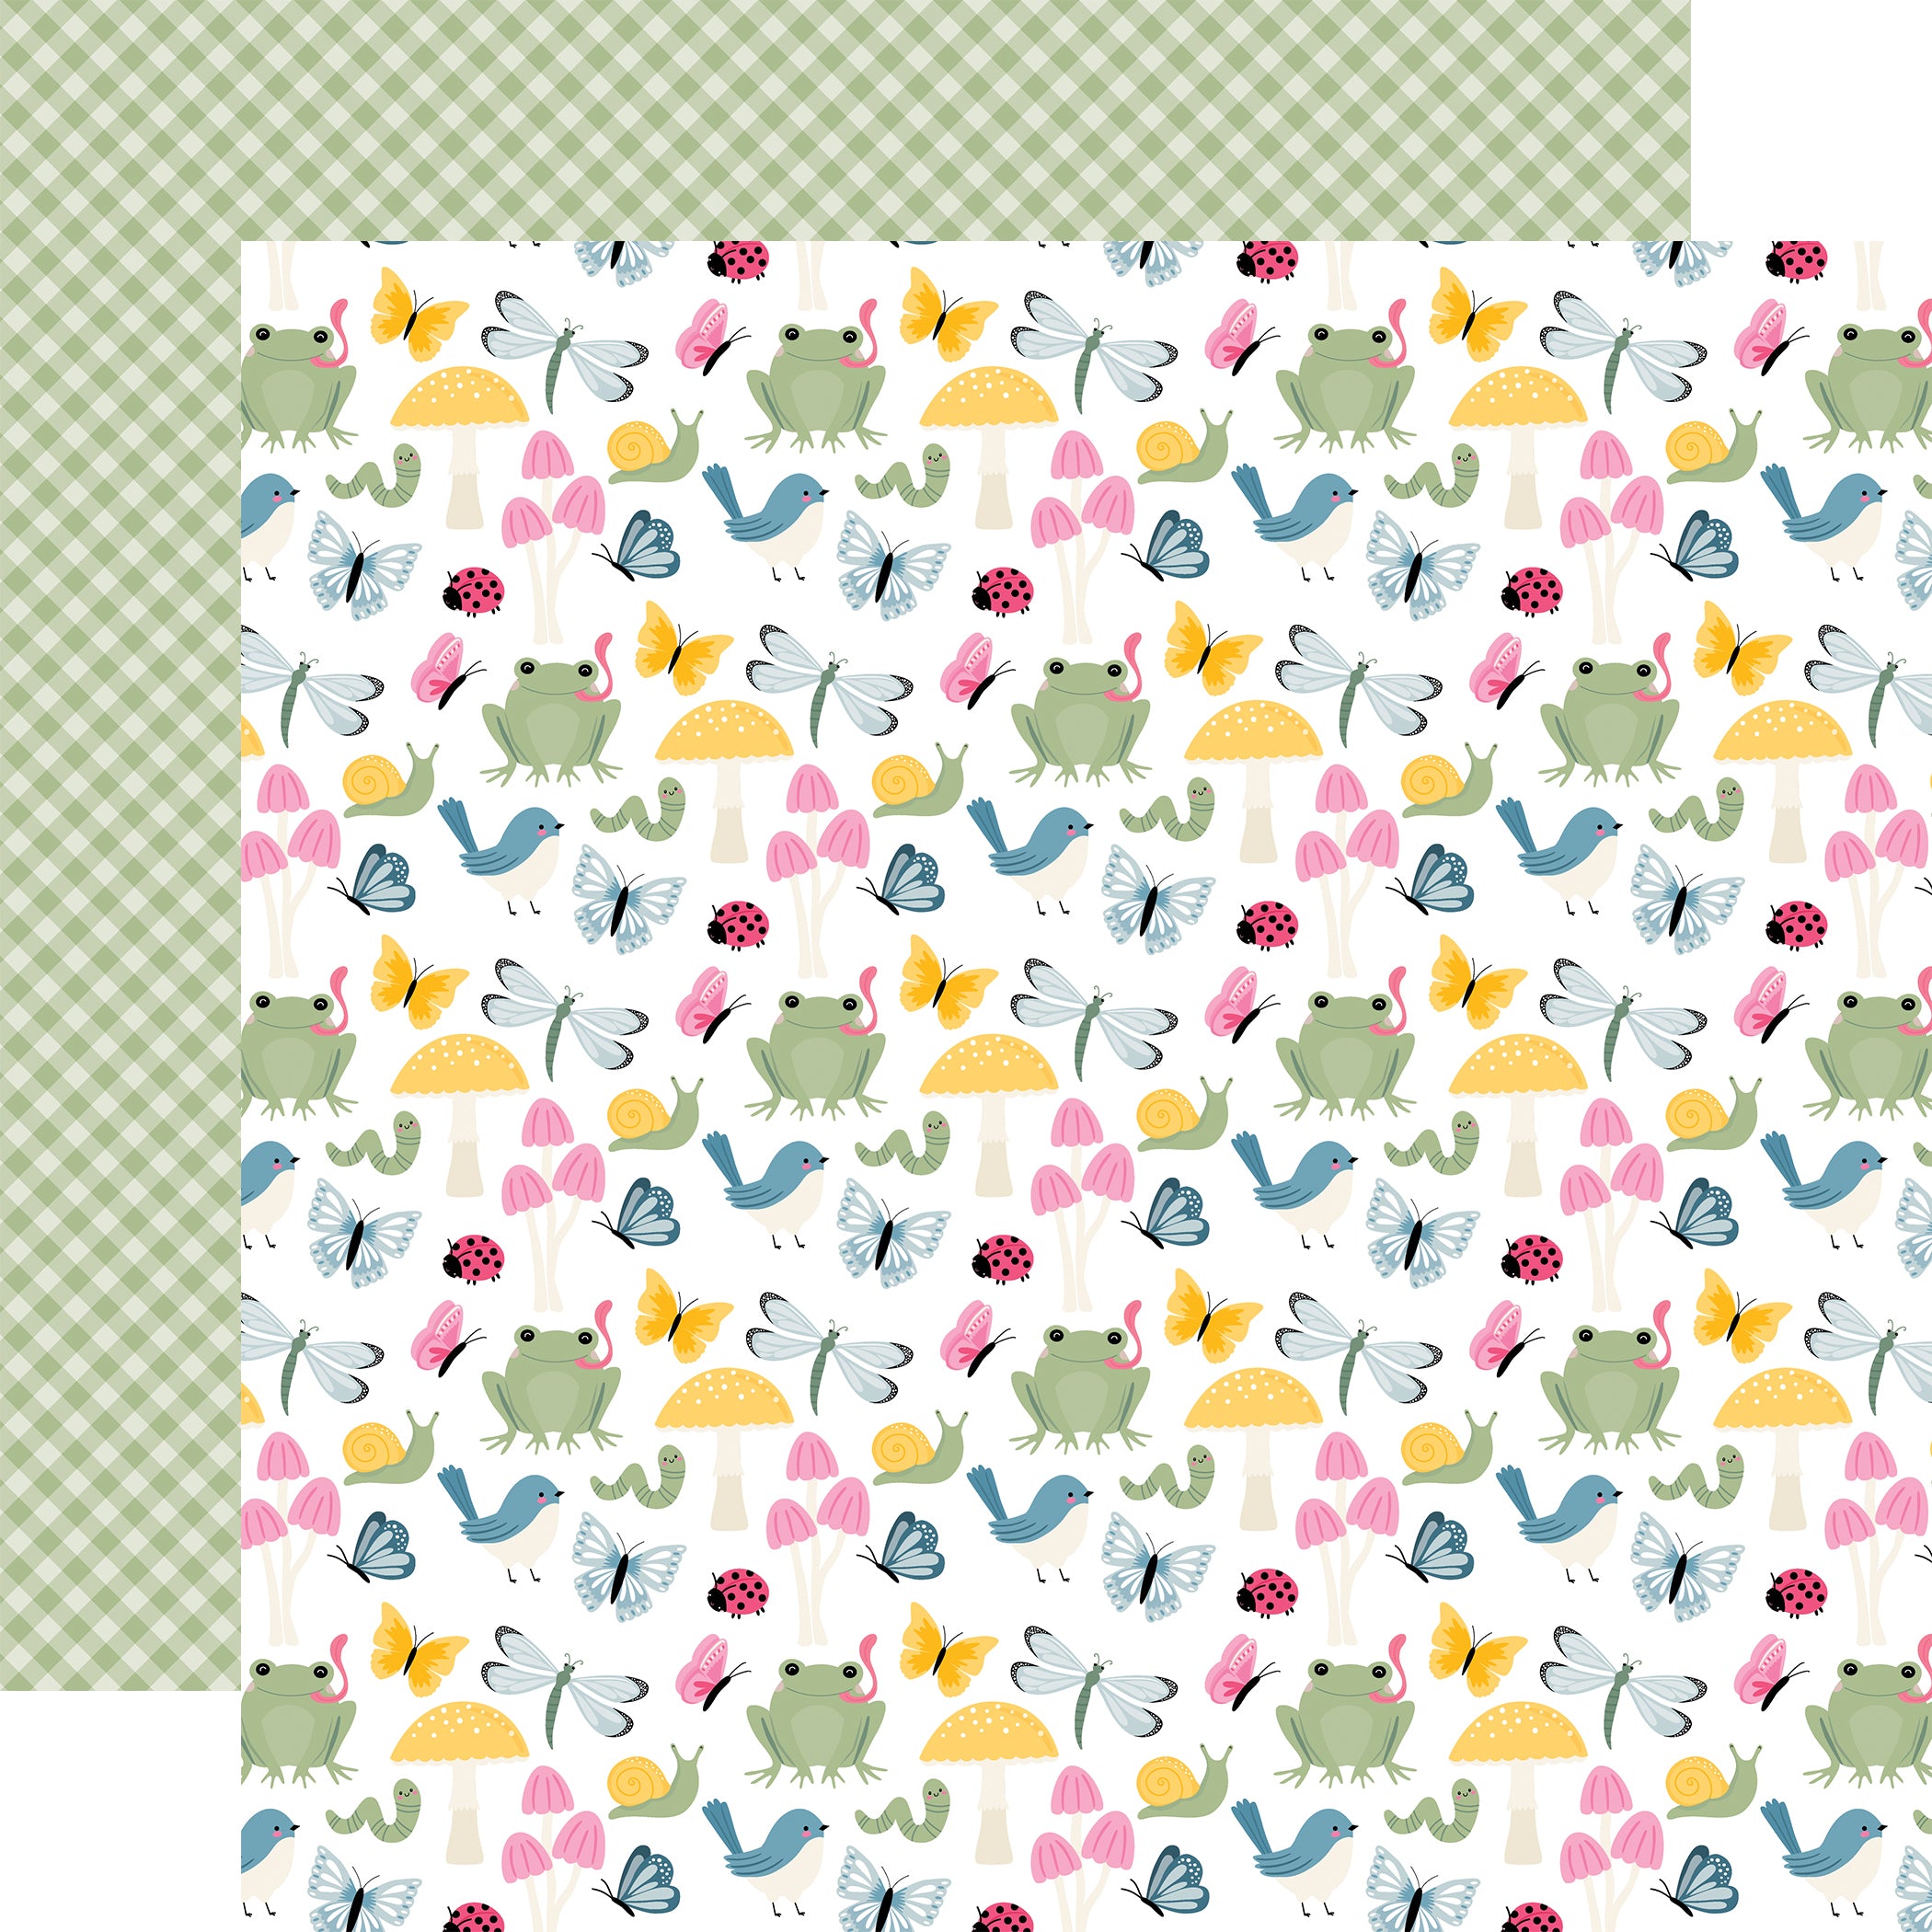 Fairy Garden Collection Fairy Tale Friends  12 x 12 Double-Sided Scrapbook Paper by Echo Park Paper